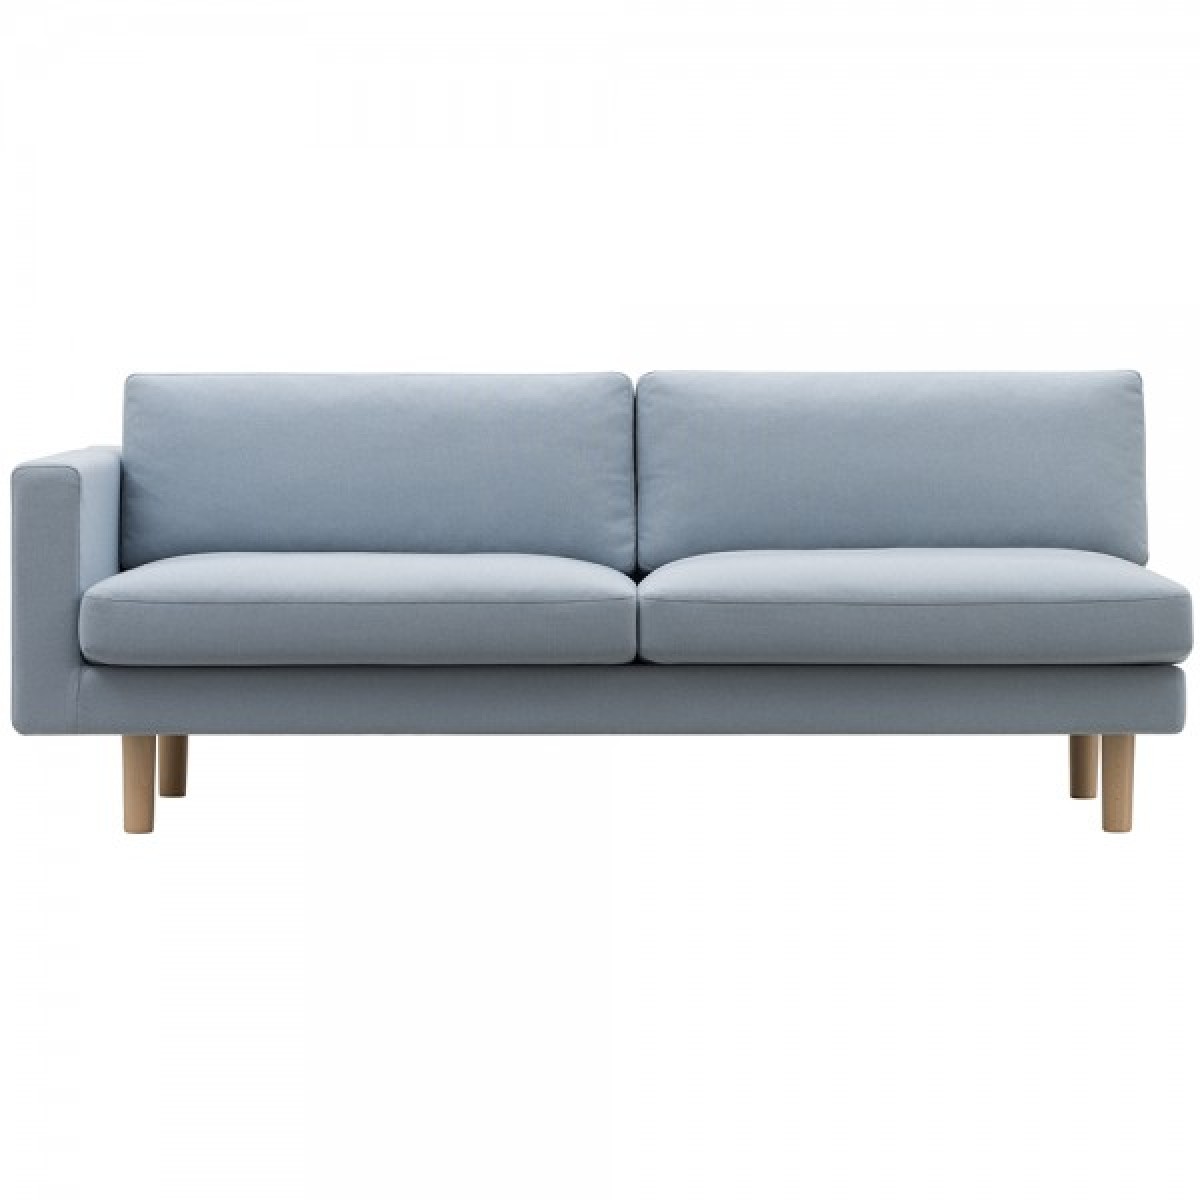 Hiroshima Two Seater Sofa Left (Loose Cover Version)